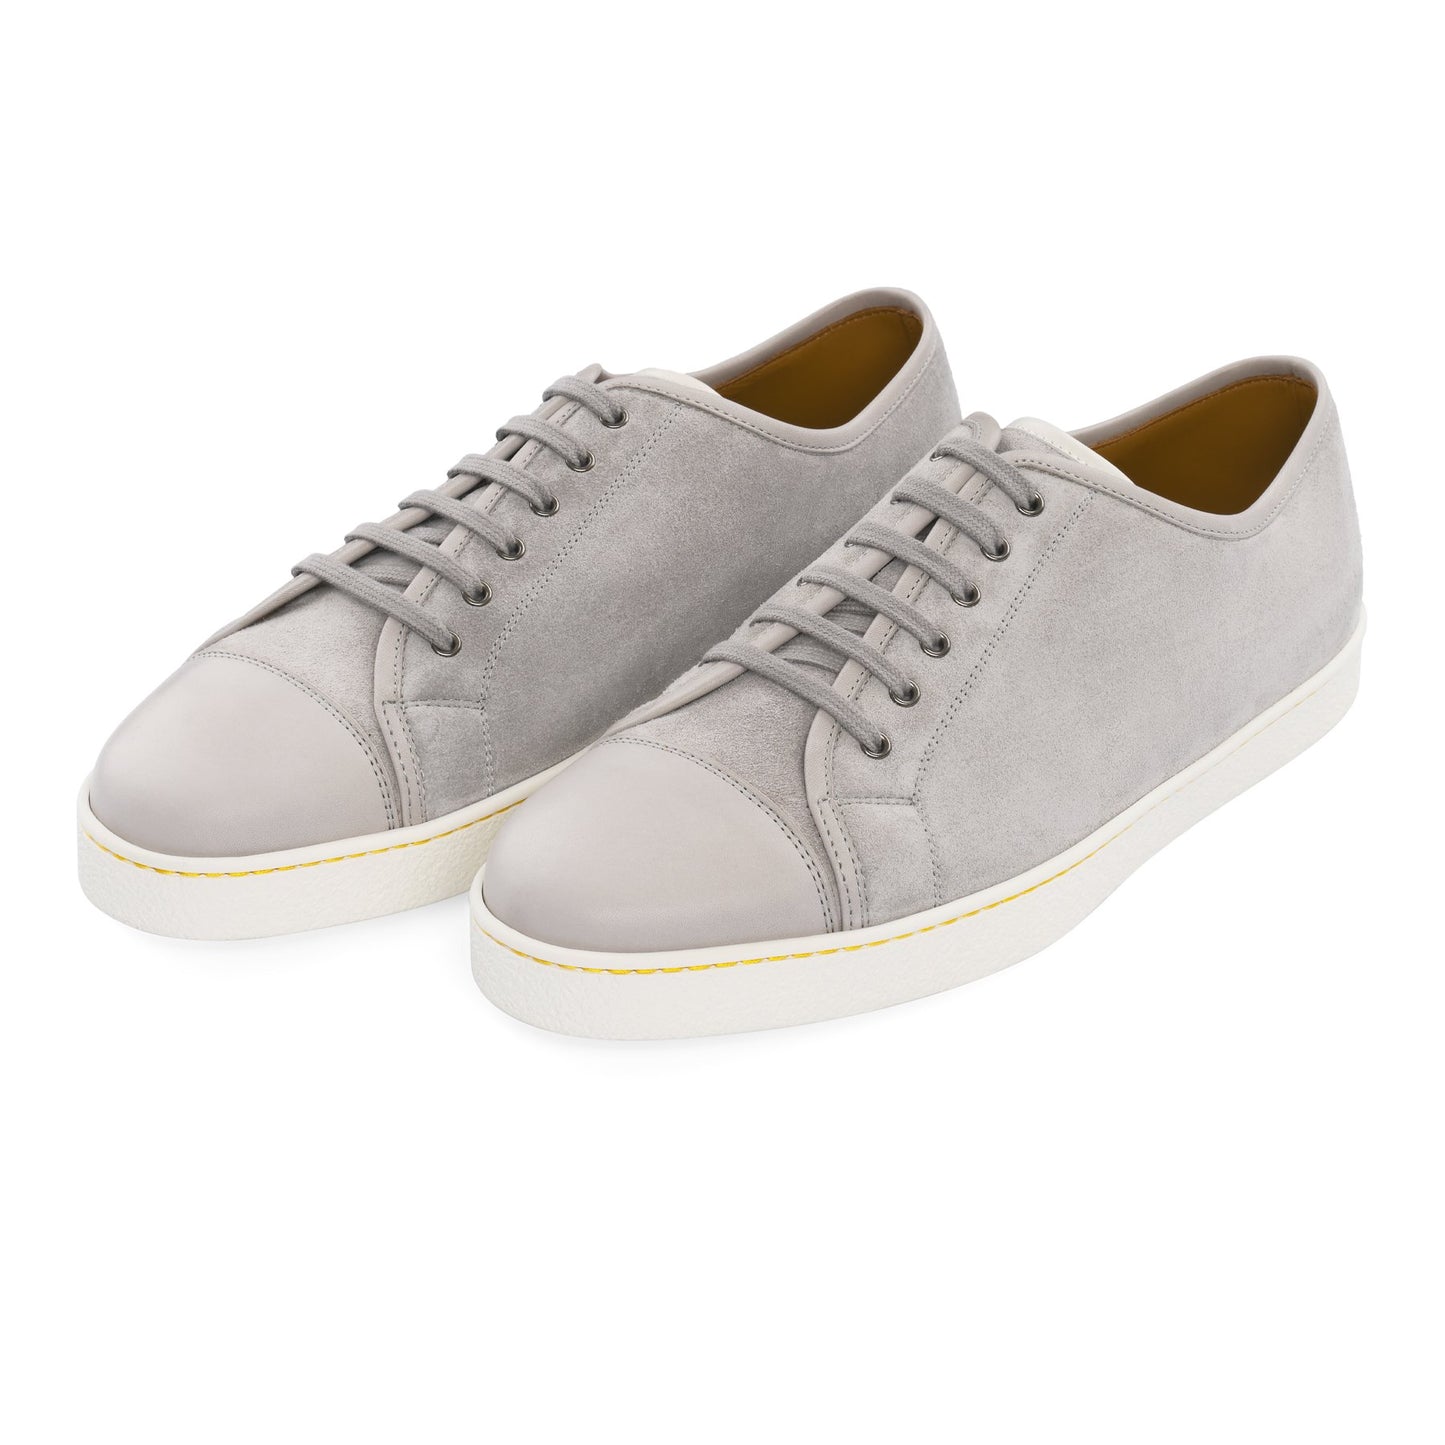 John Lobb "Levah" Suede and Leather Sneakers in Light Grey - SARTALE